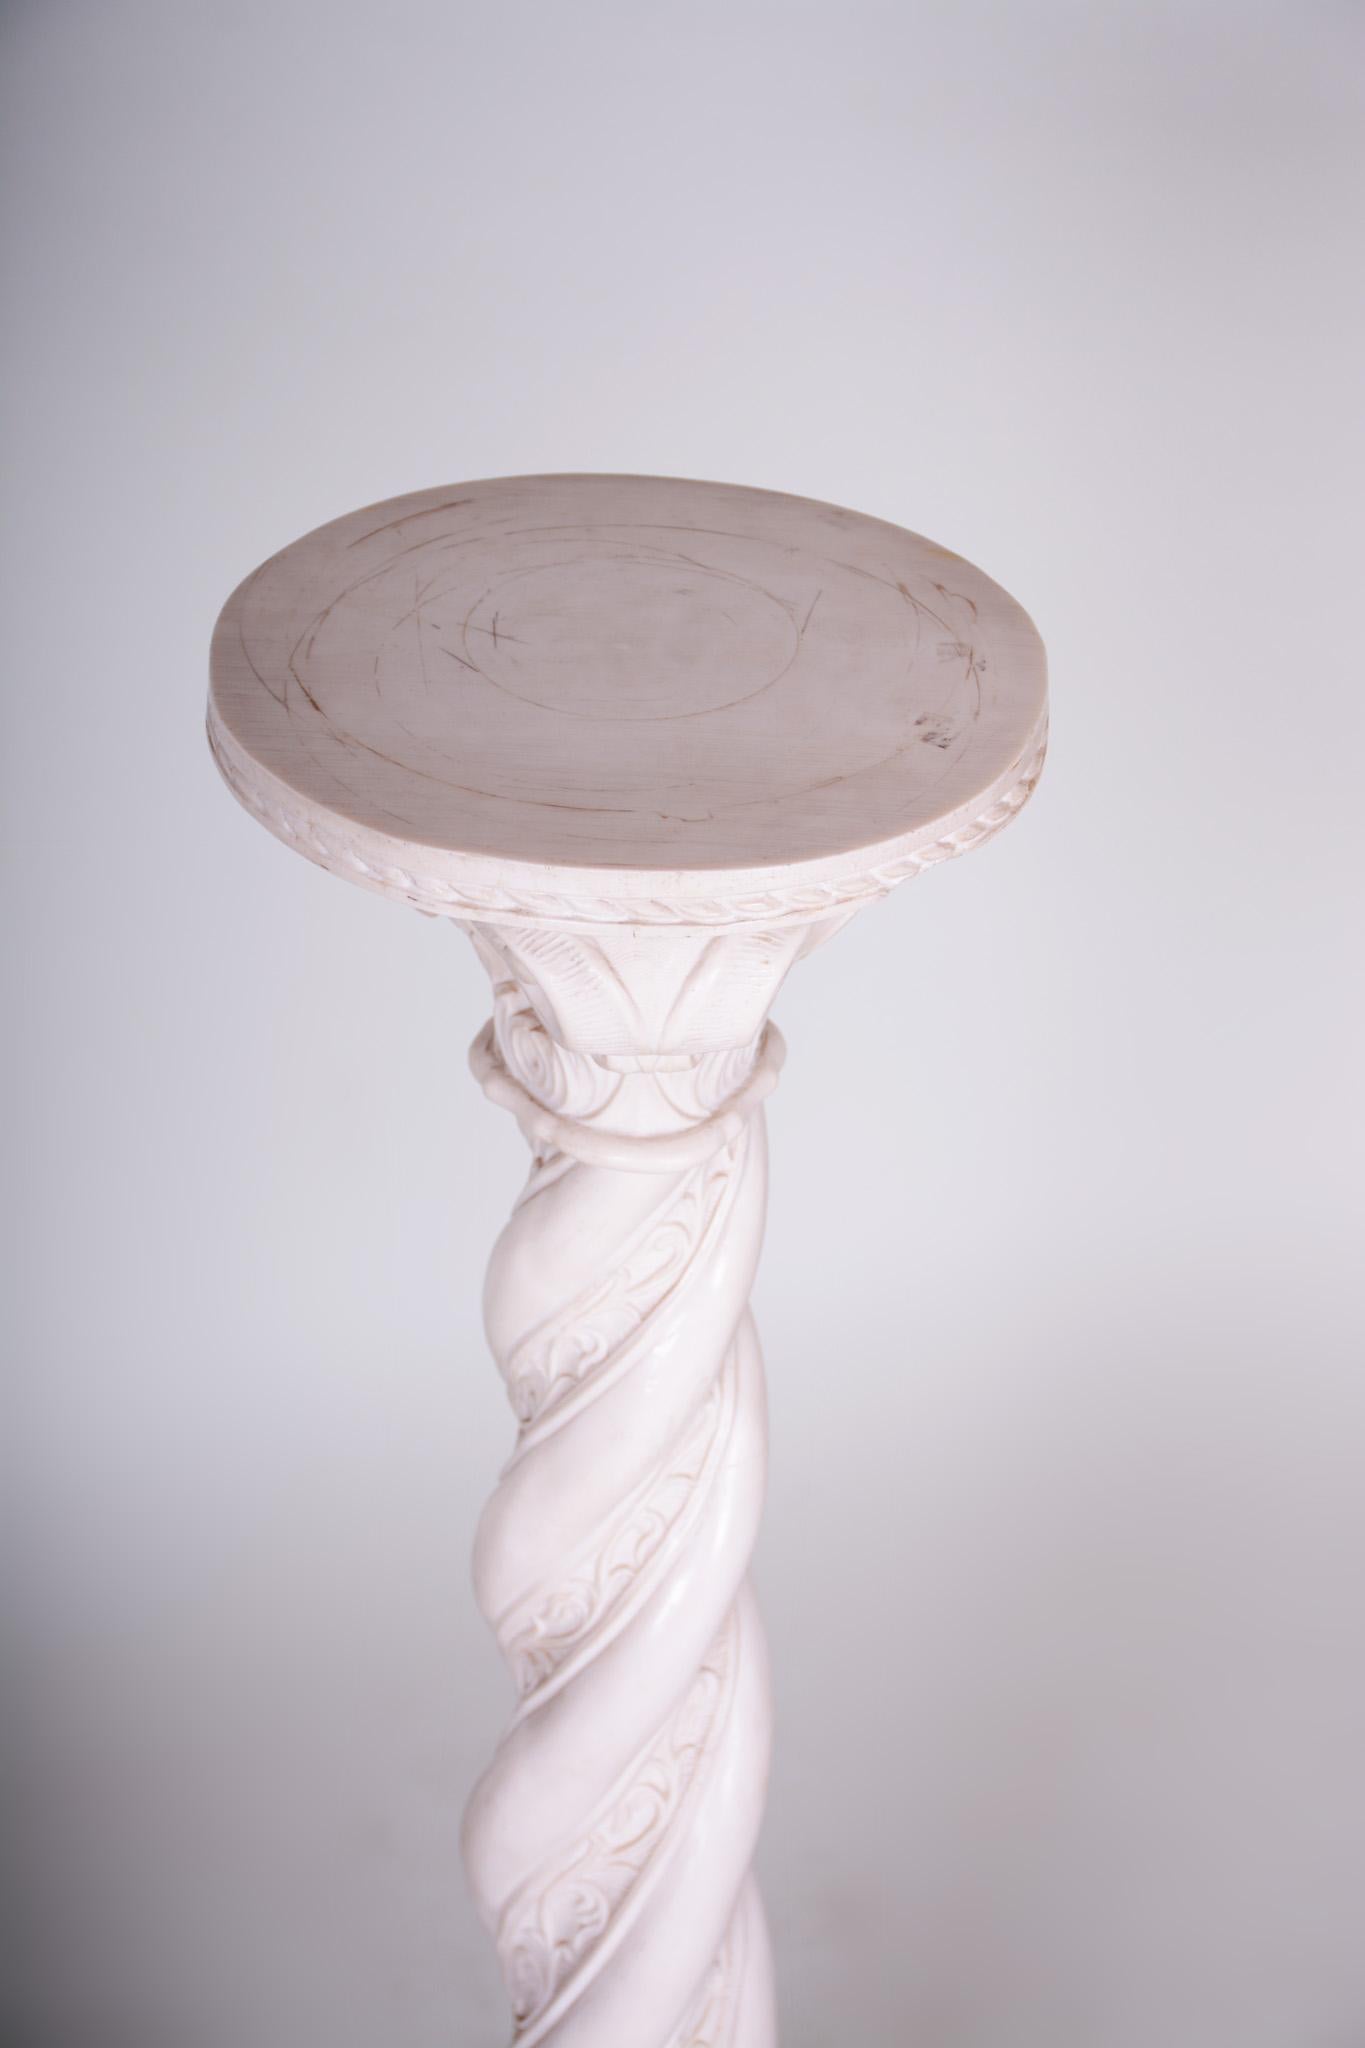 Original white marble column (Czechia), 20th century.
Original preserved condition
Period: 1920-1929.

We guarantee safe a the cheapest air transport from Europe to the whole world within 7 days.
The price is the same as for ship transport but